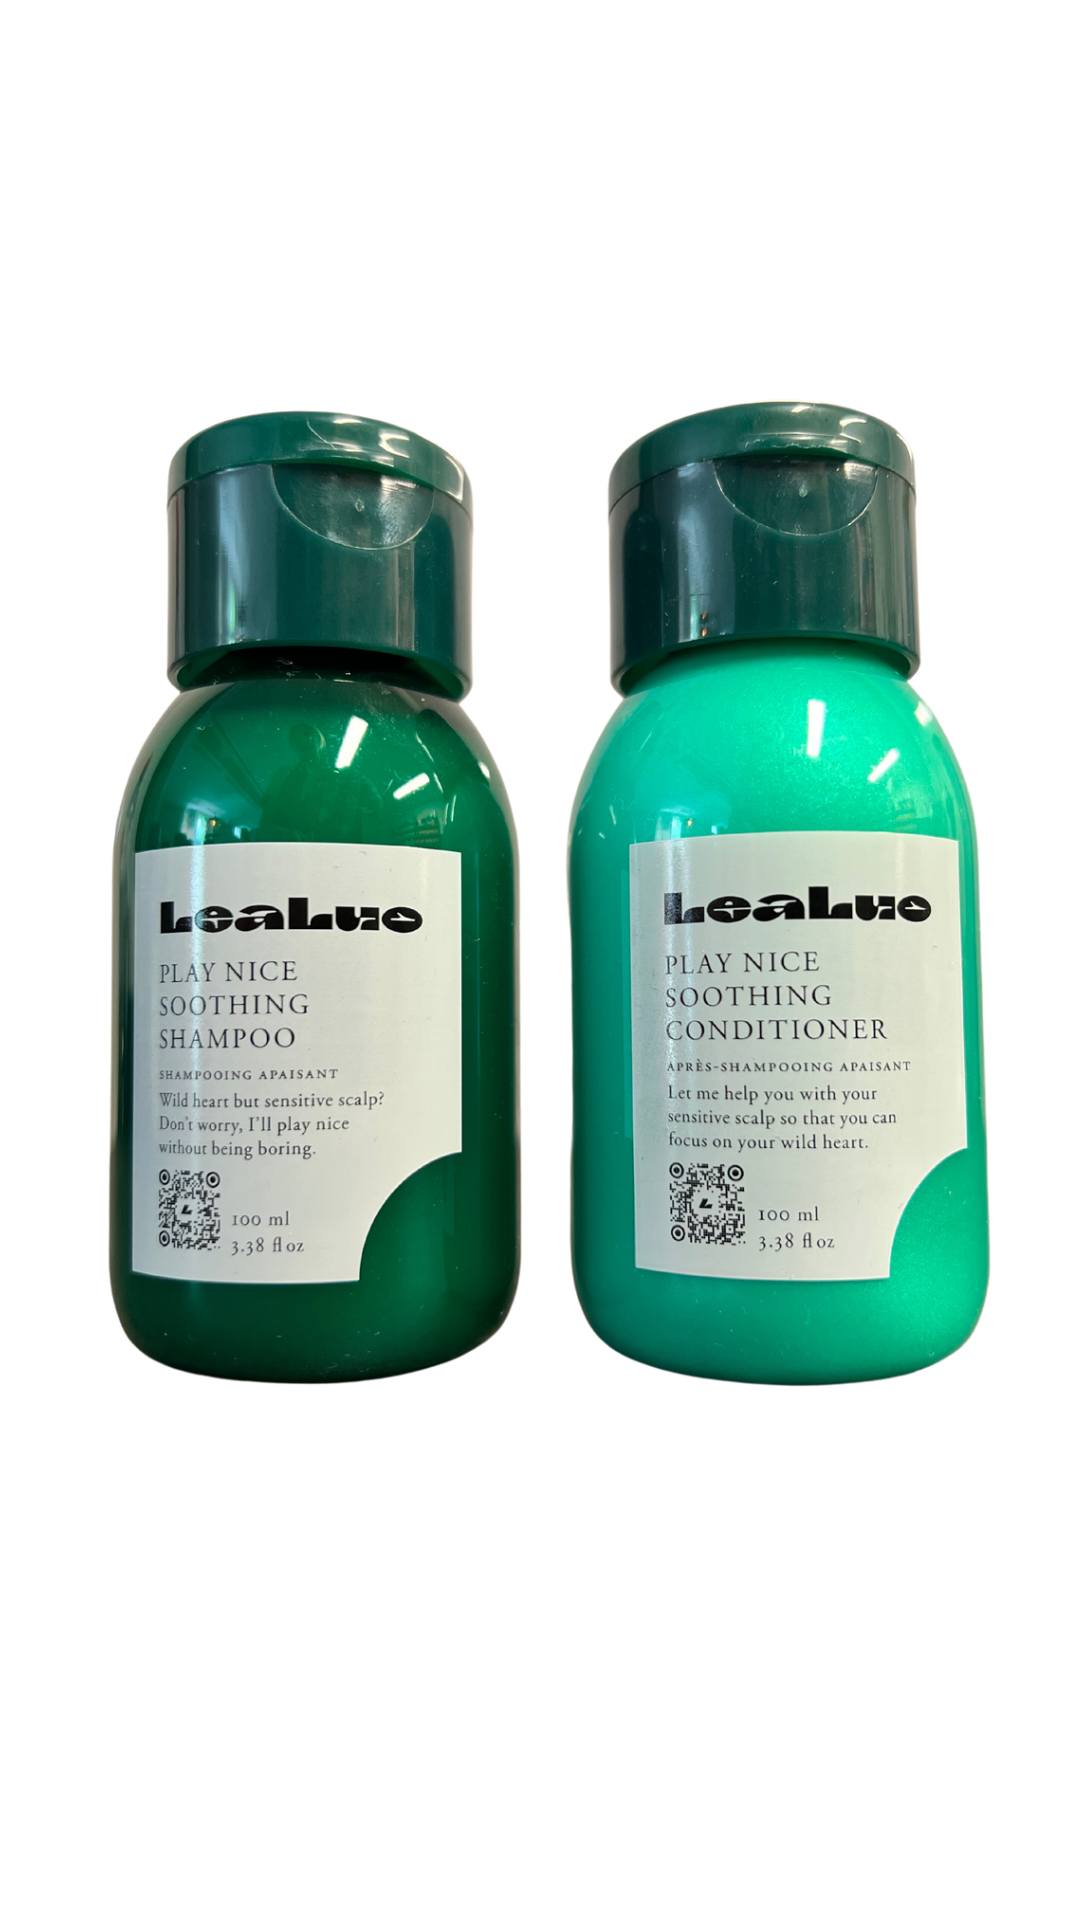 LeaLuo Play Nice Soothing Shampoo And conditioner 100 ml x2